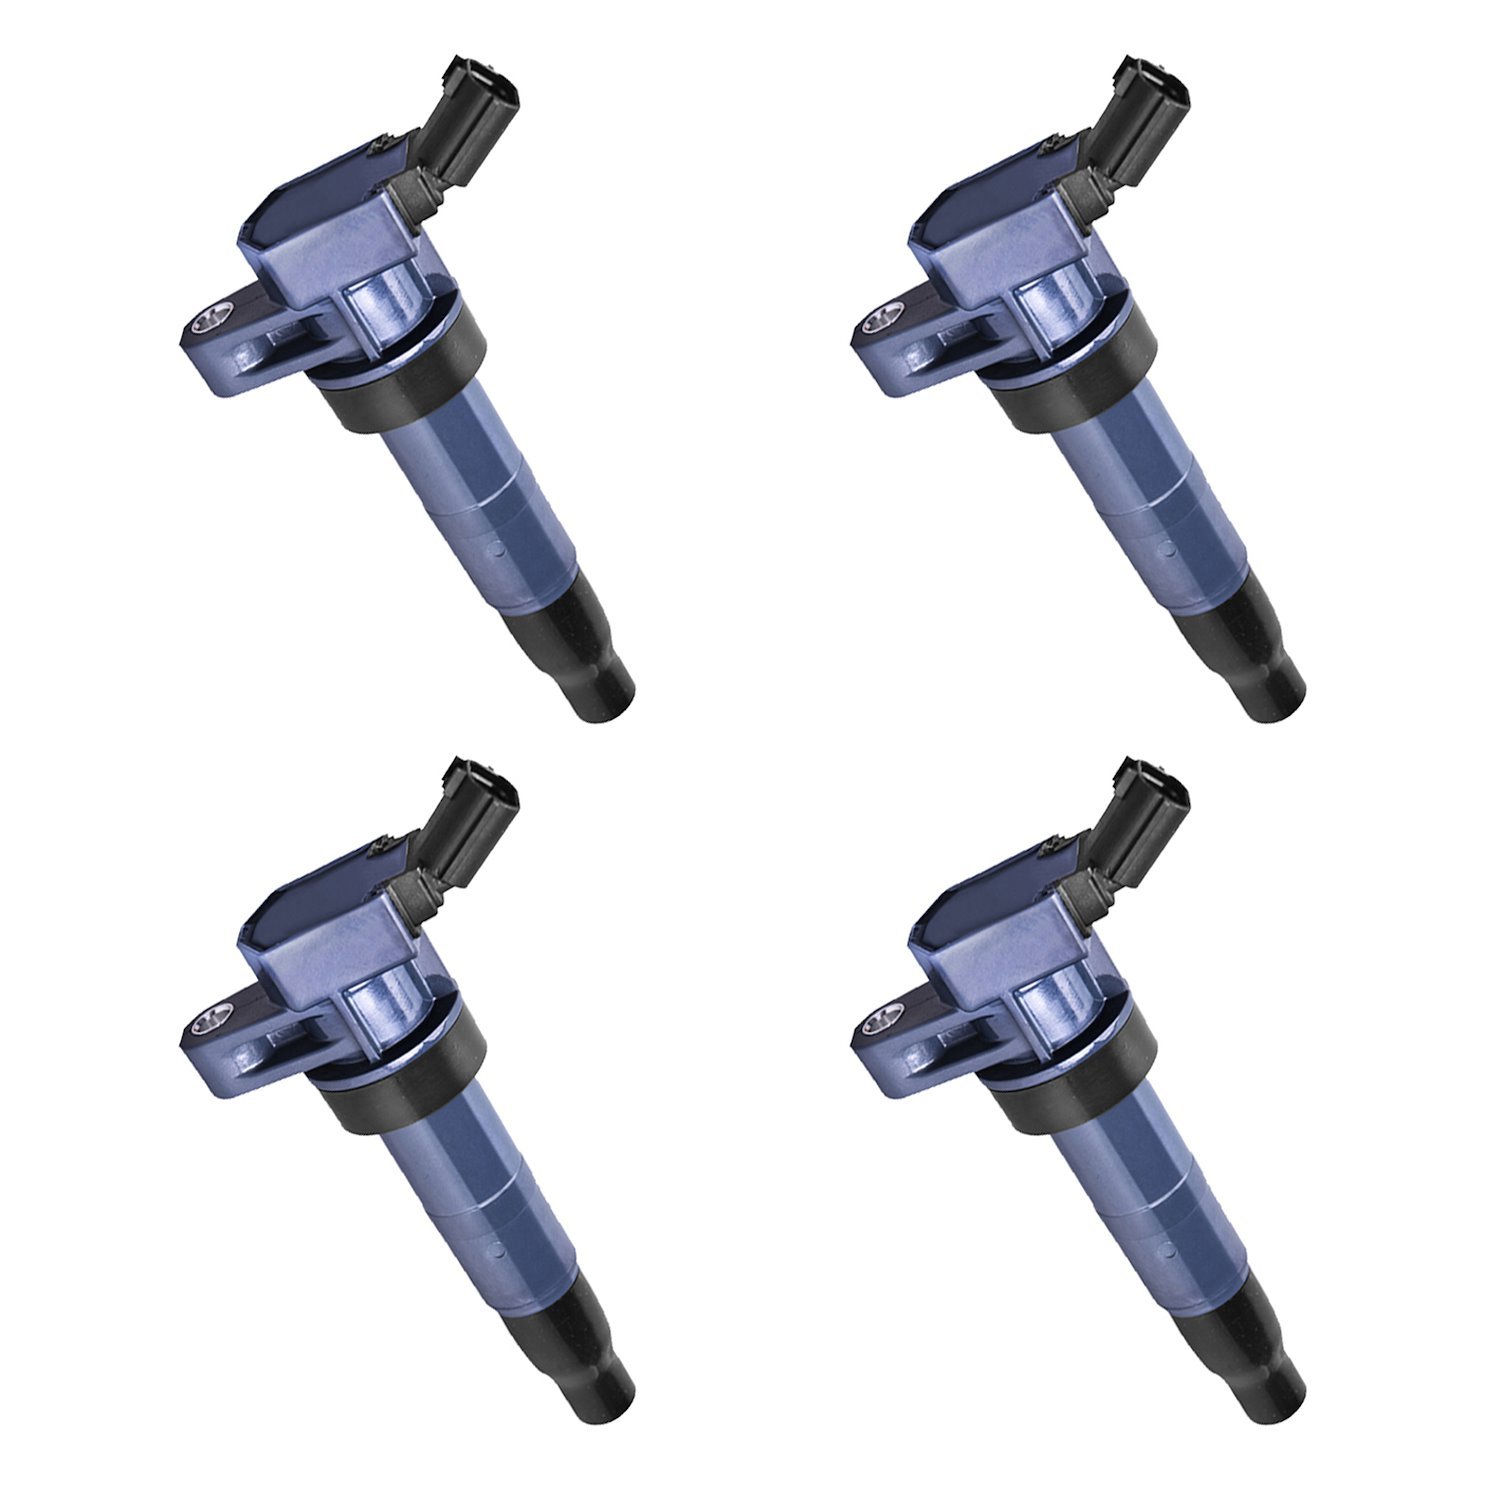 OE Replacement Ignition Coils for Hyundai Sonata Genesis